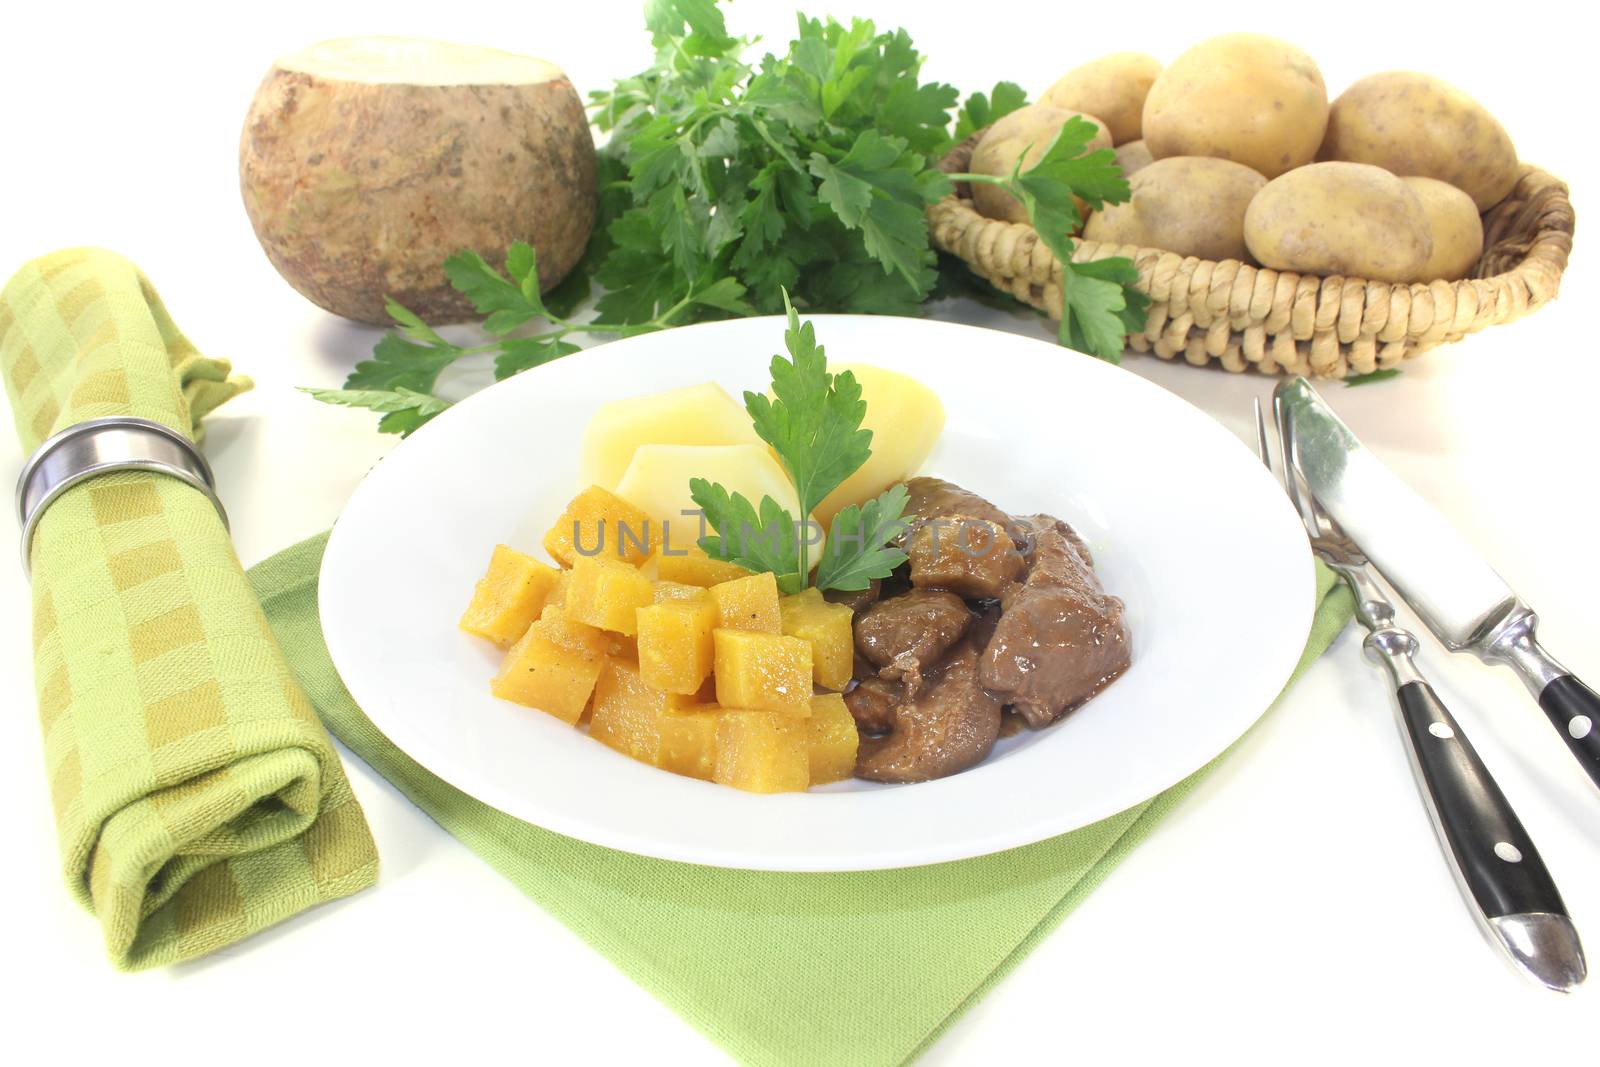 Venison goulash with turnip and potatoes on a light background